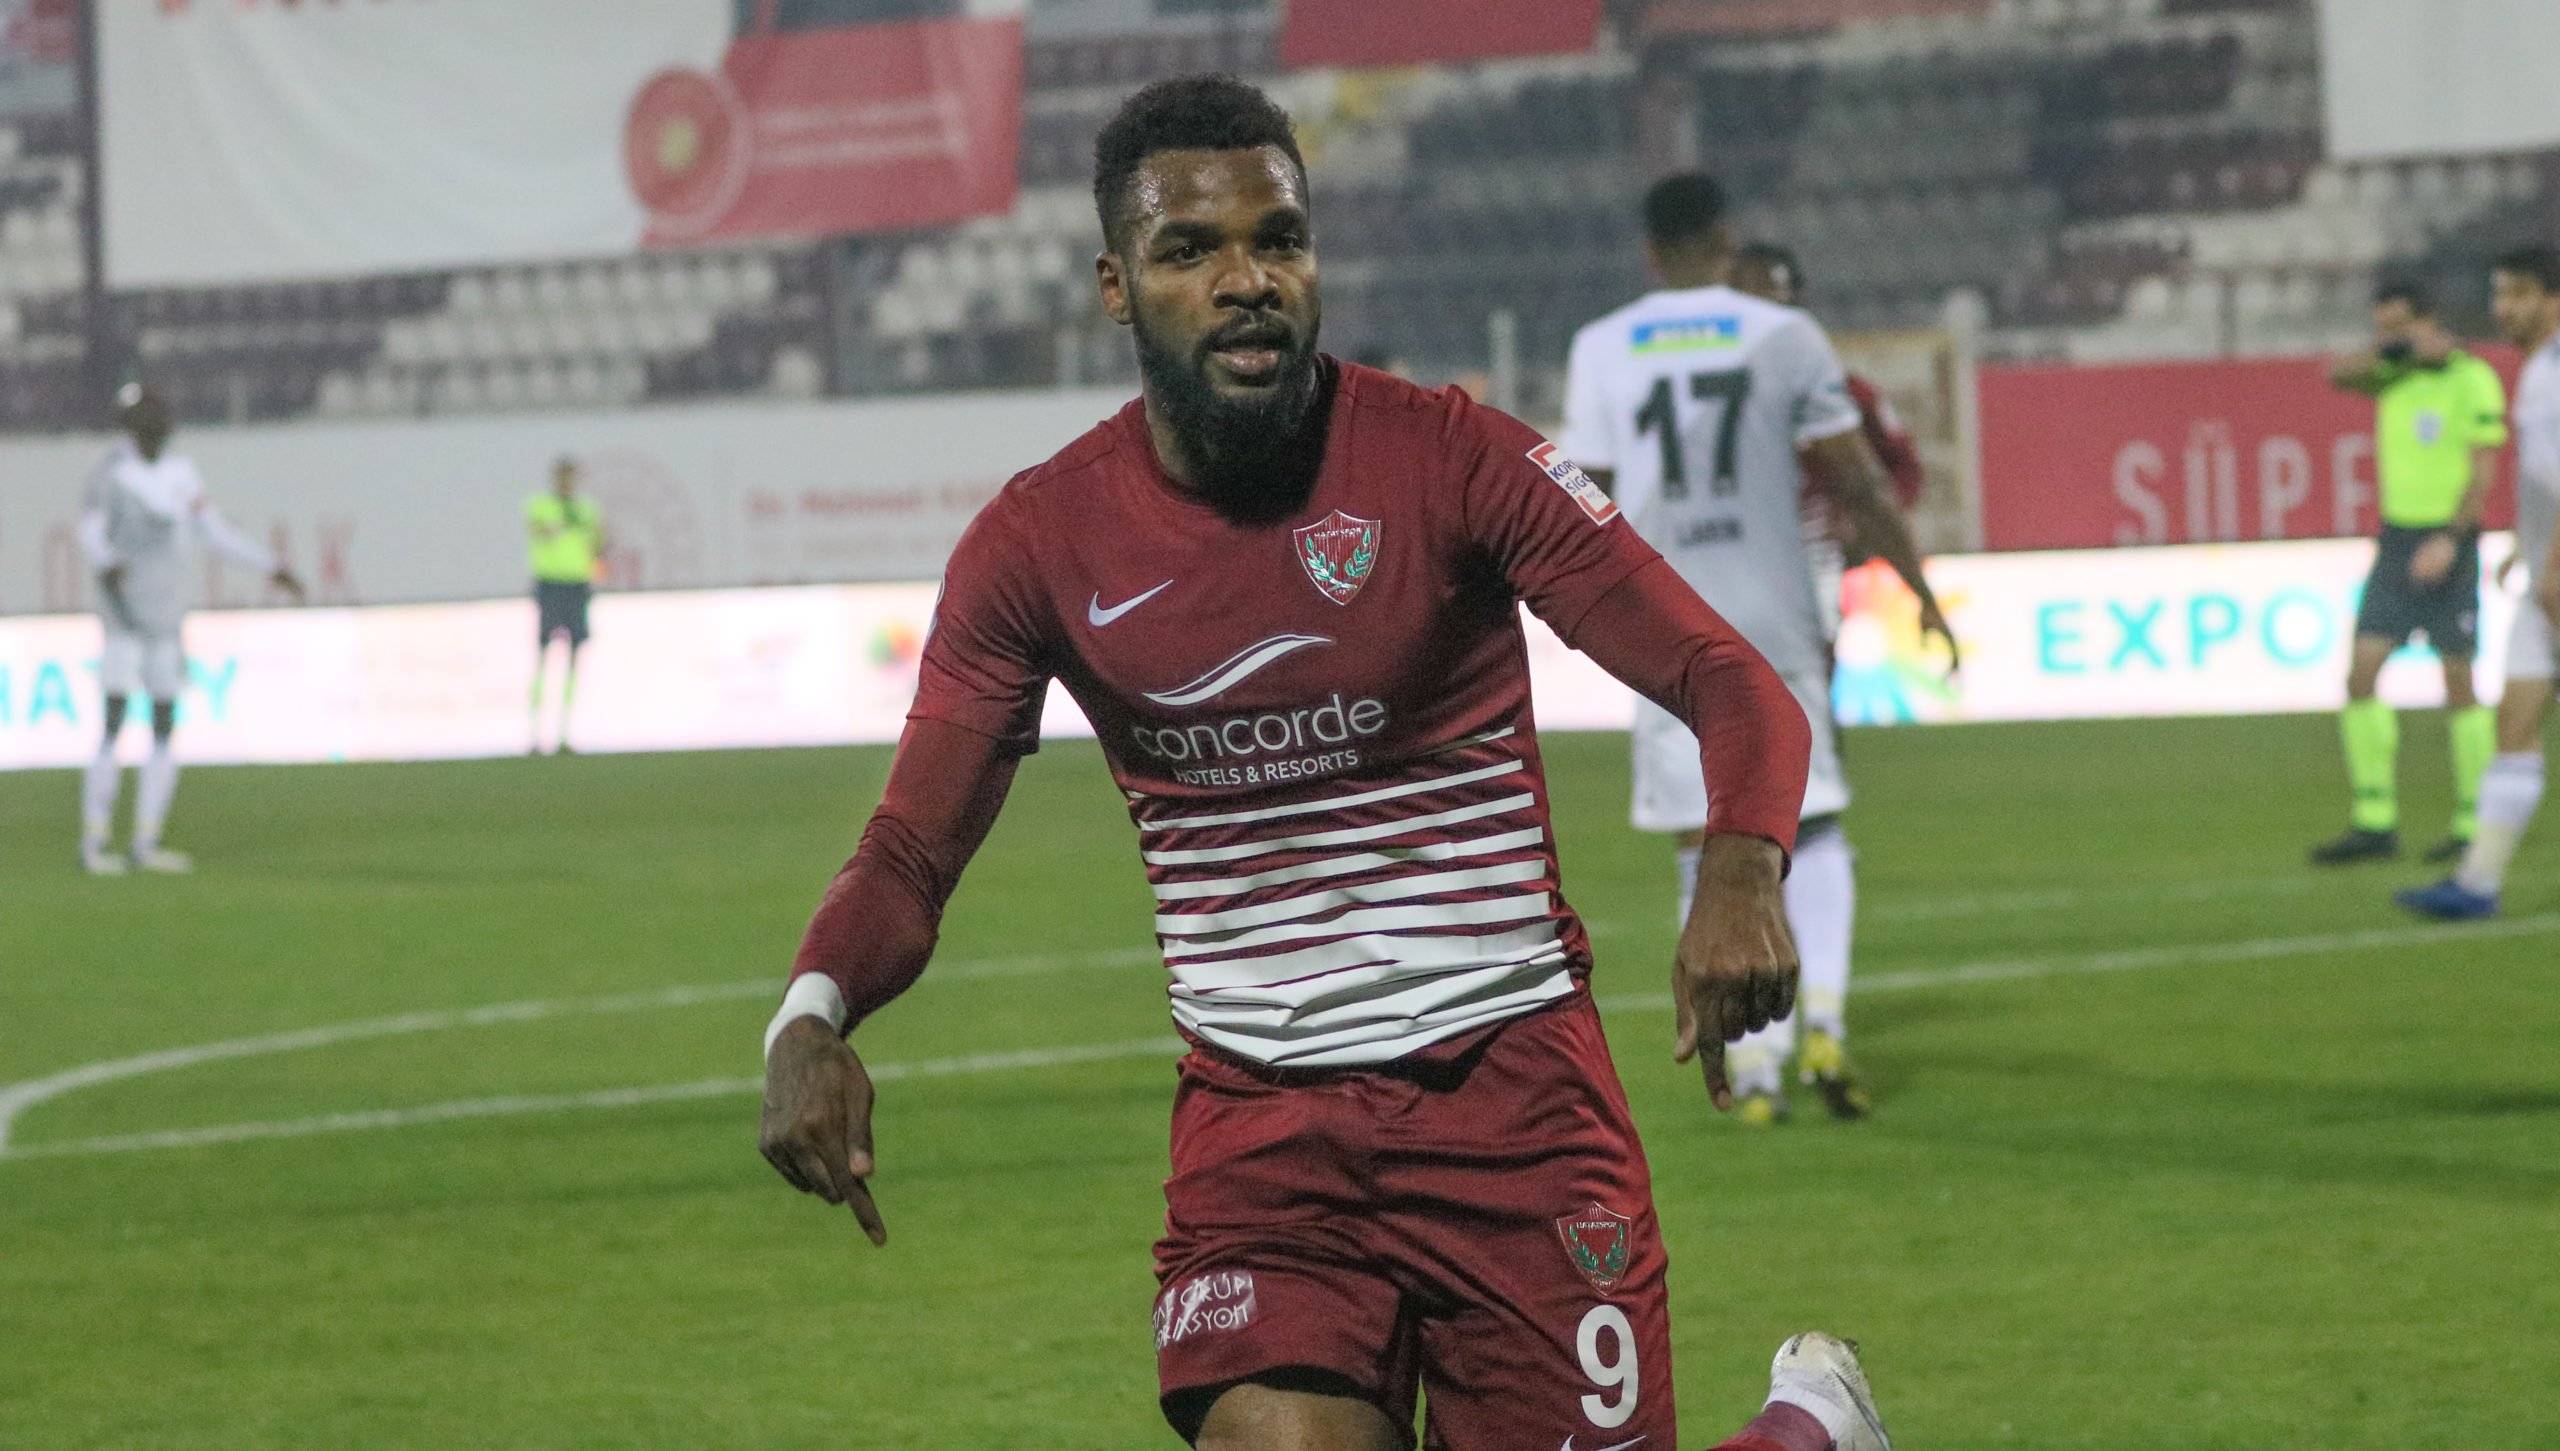 Hatayspor don't mention Celtic as one of the contenders to sign Aaron Boupendza